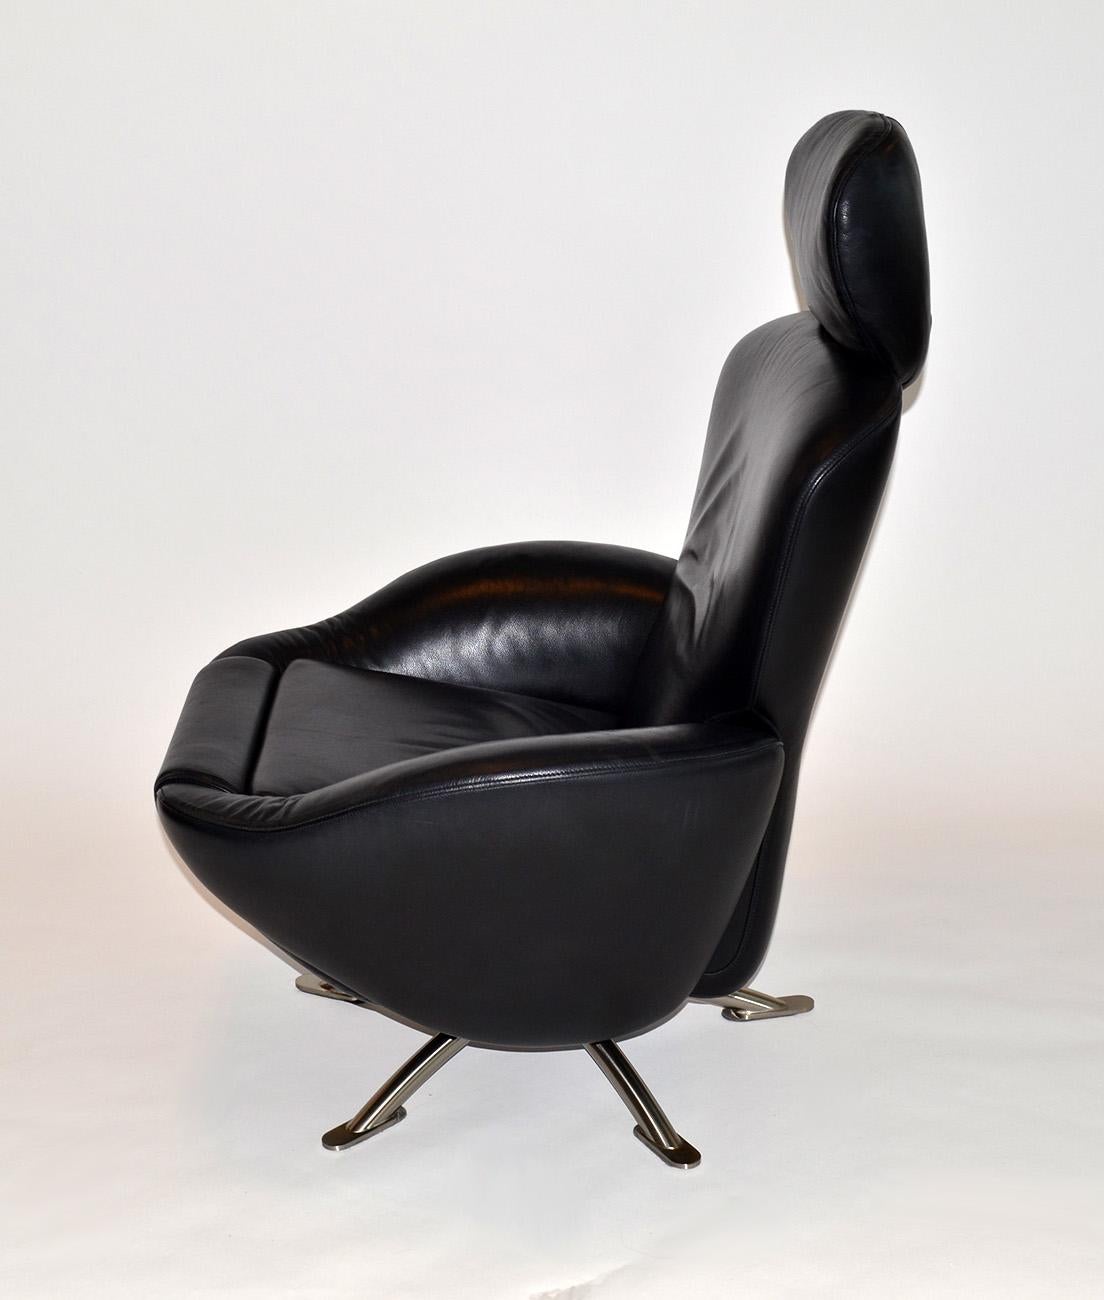 Cassina dodo black leather recliner armchair lounge Italy 2000s 
Designed by Toshiyuki Kita for Cassina. Early 2000s production. This modern chair is upholstered in a soft, black leather. It swivels on a fixed base which can become a chaise with